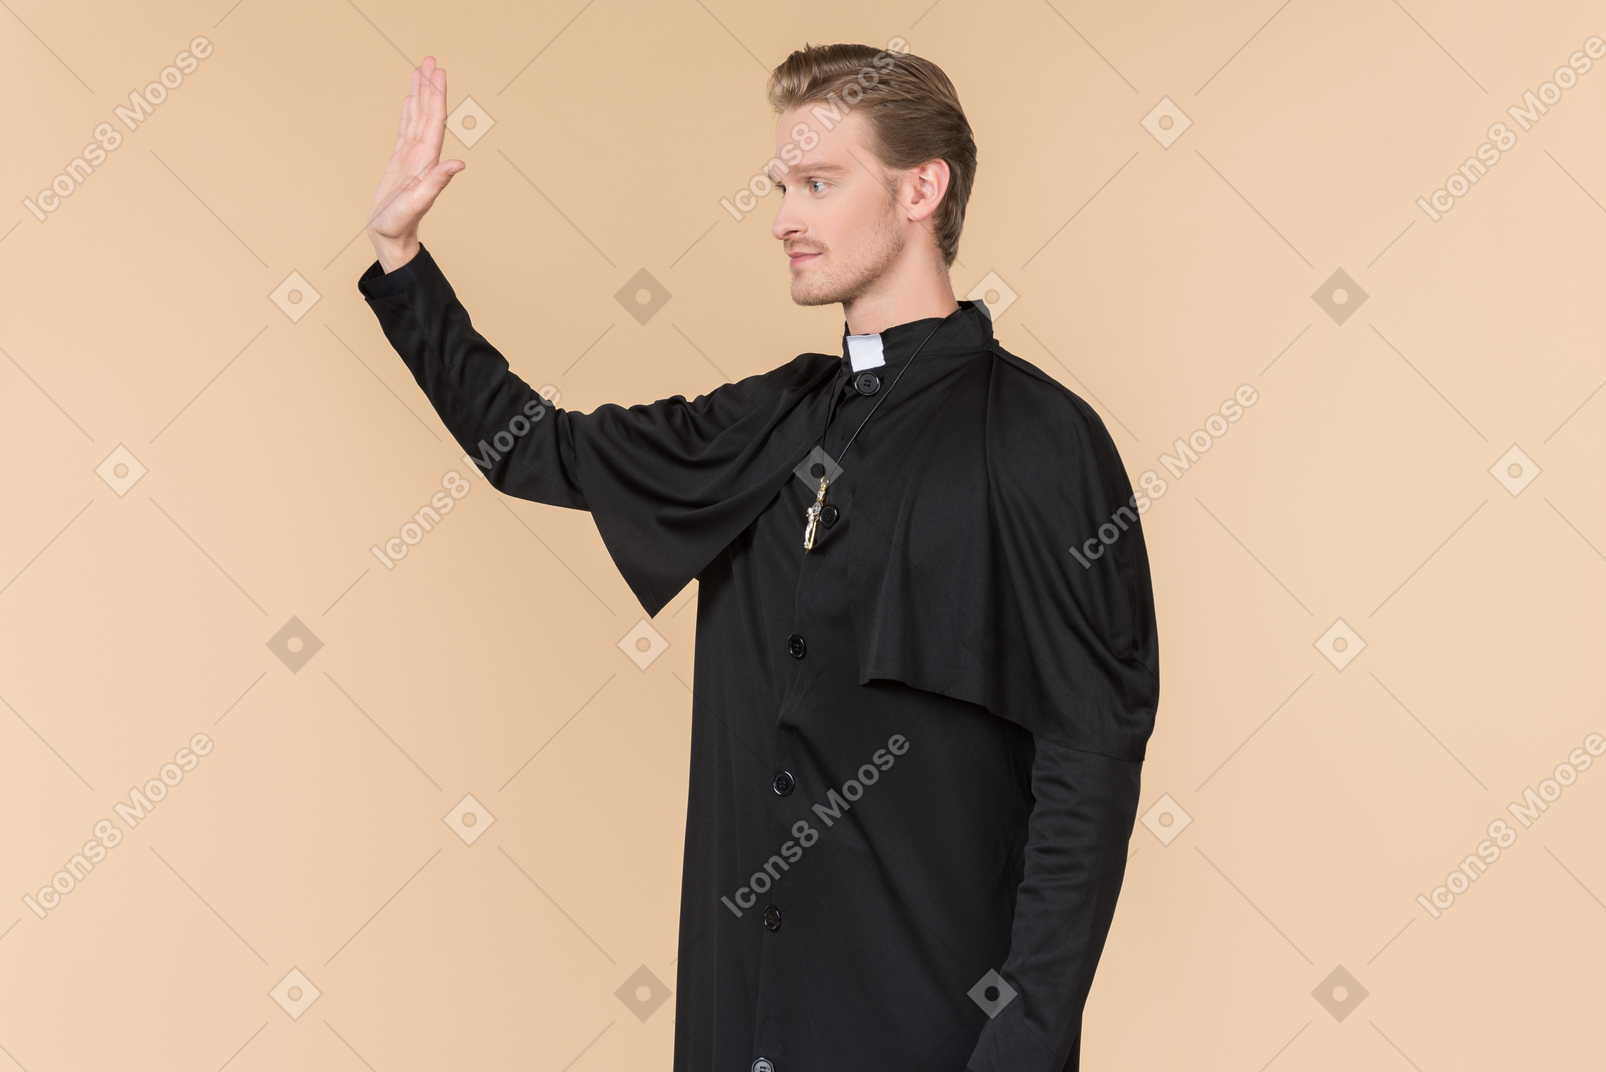 Catholic priest standing half sideways with his hand up